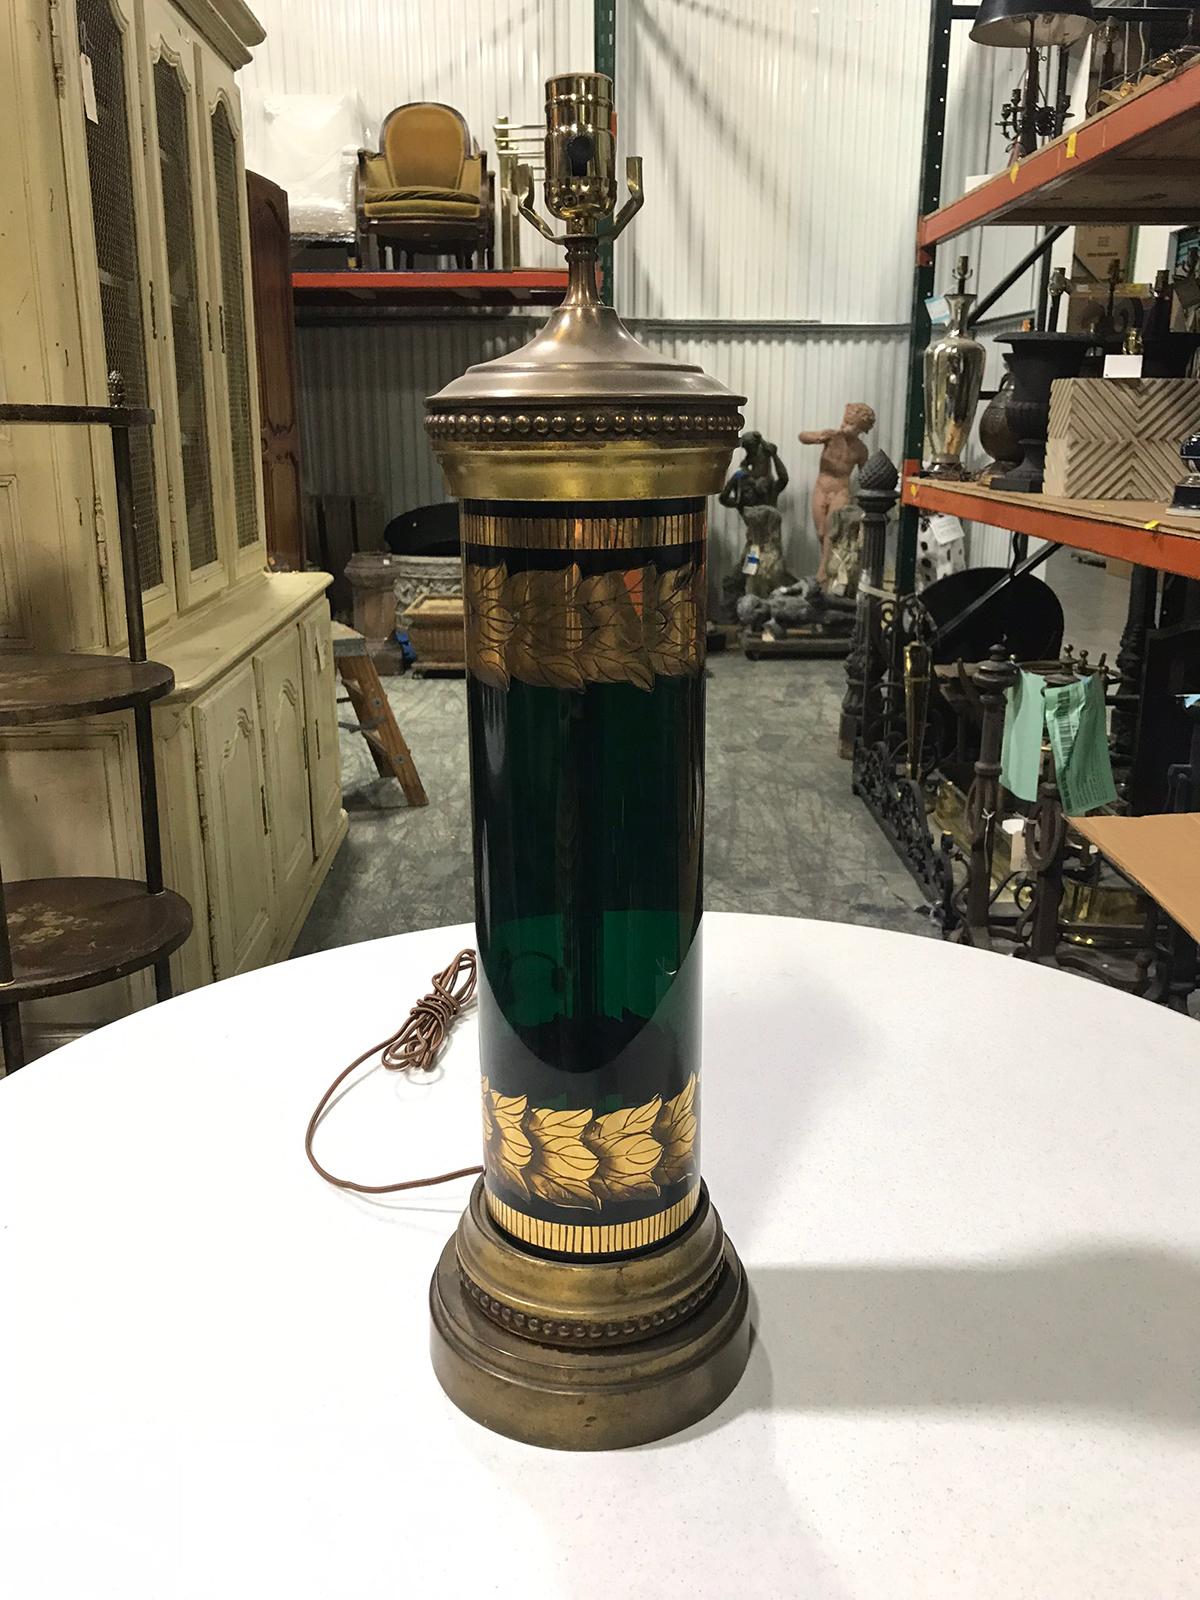 20th century Hollywood Regency style gilt and green glass lamp, original base
New wiring.